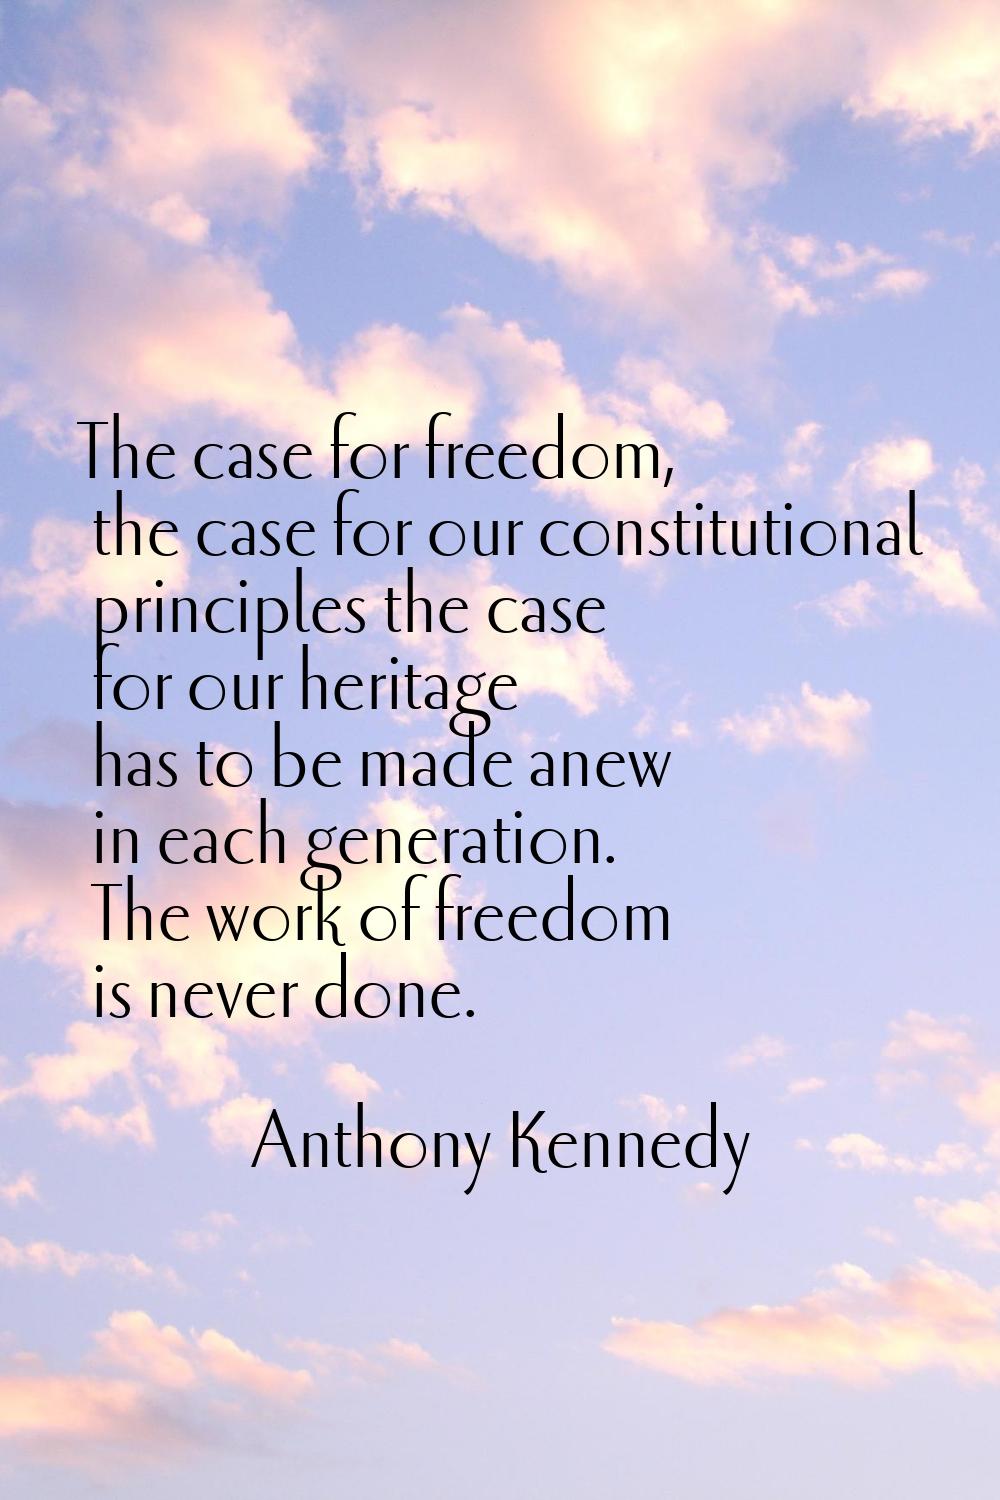 The case for freedom, the case for our constitutional principles the case for our heritage has to b